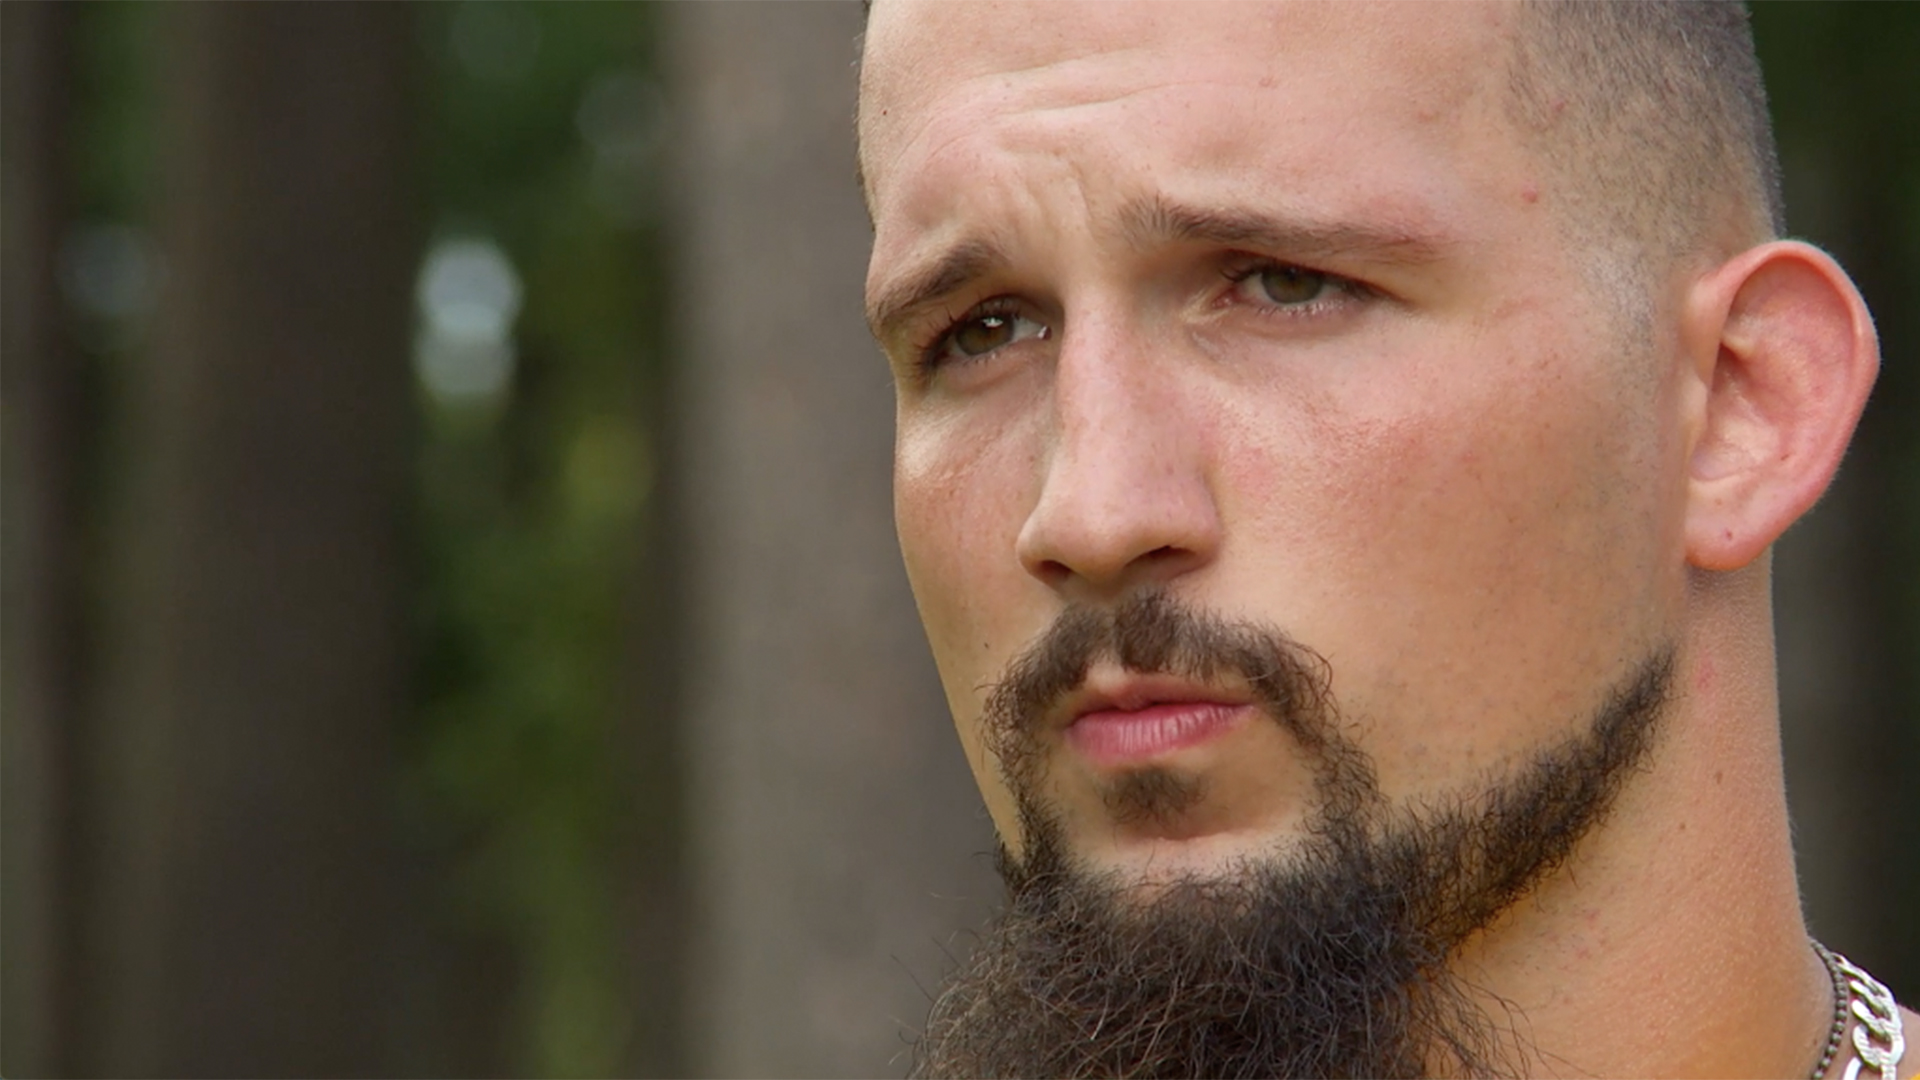 Watch Sneak Peek: Searching for the Truth | Life After Lockup Video Extras